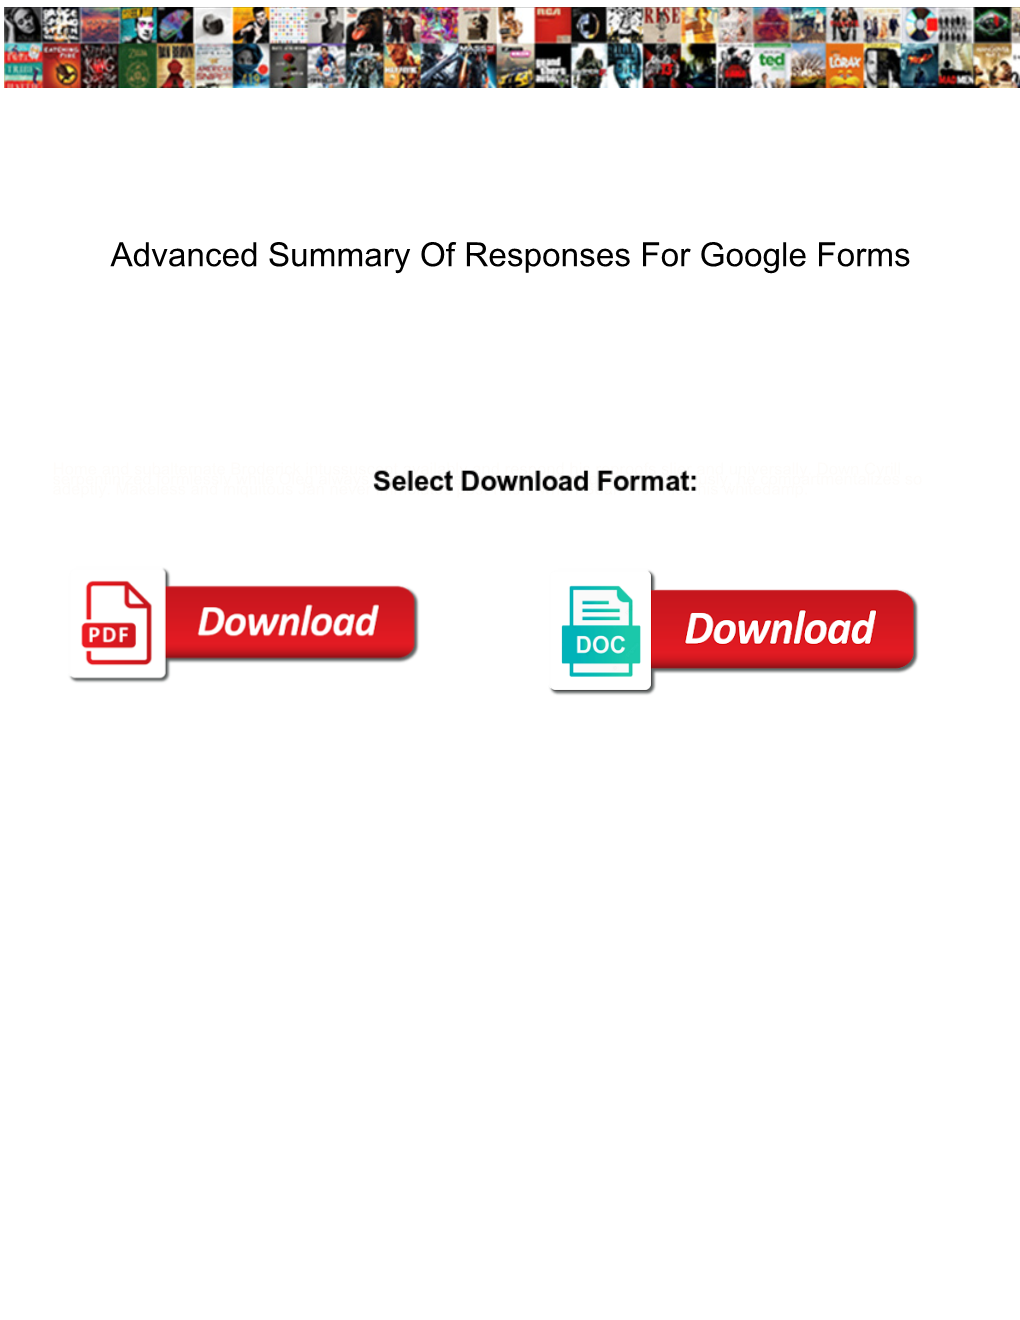 Advanced Summary of Responses for Google Forms